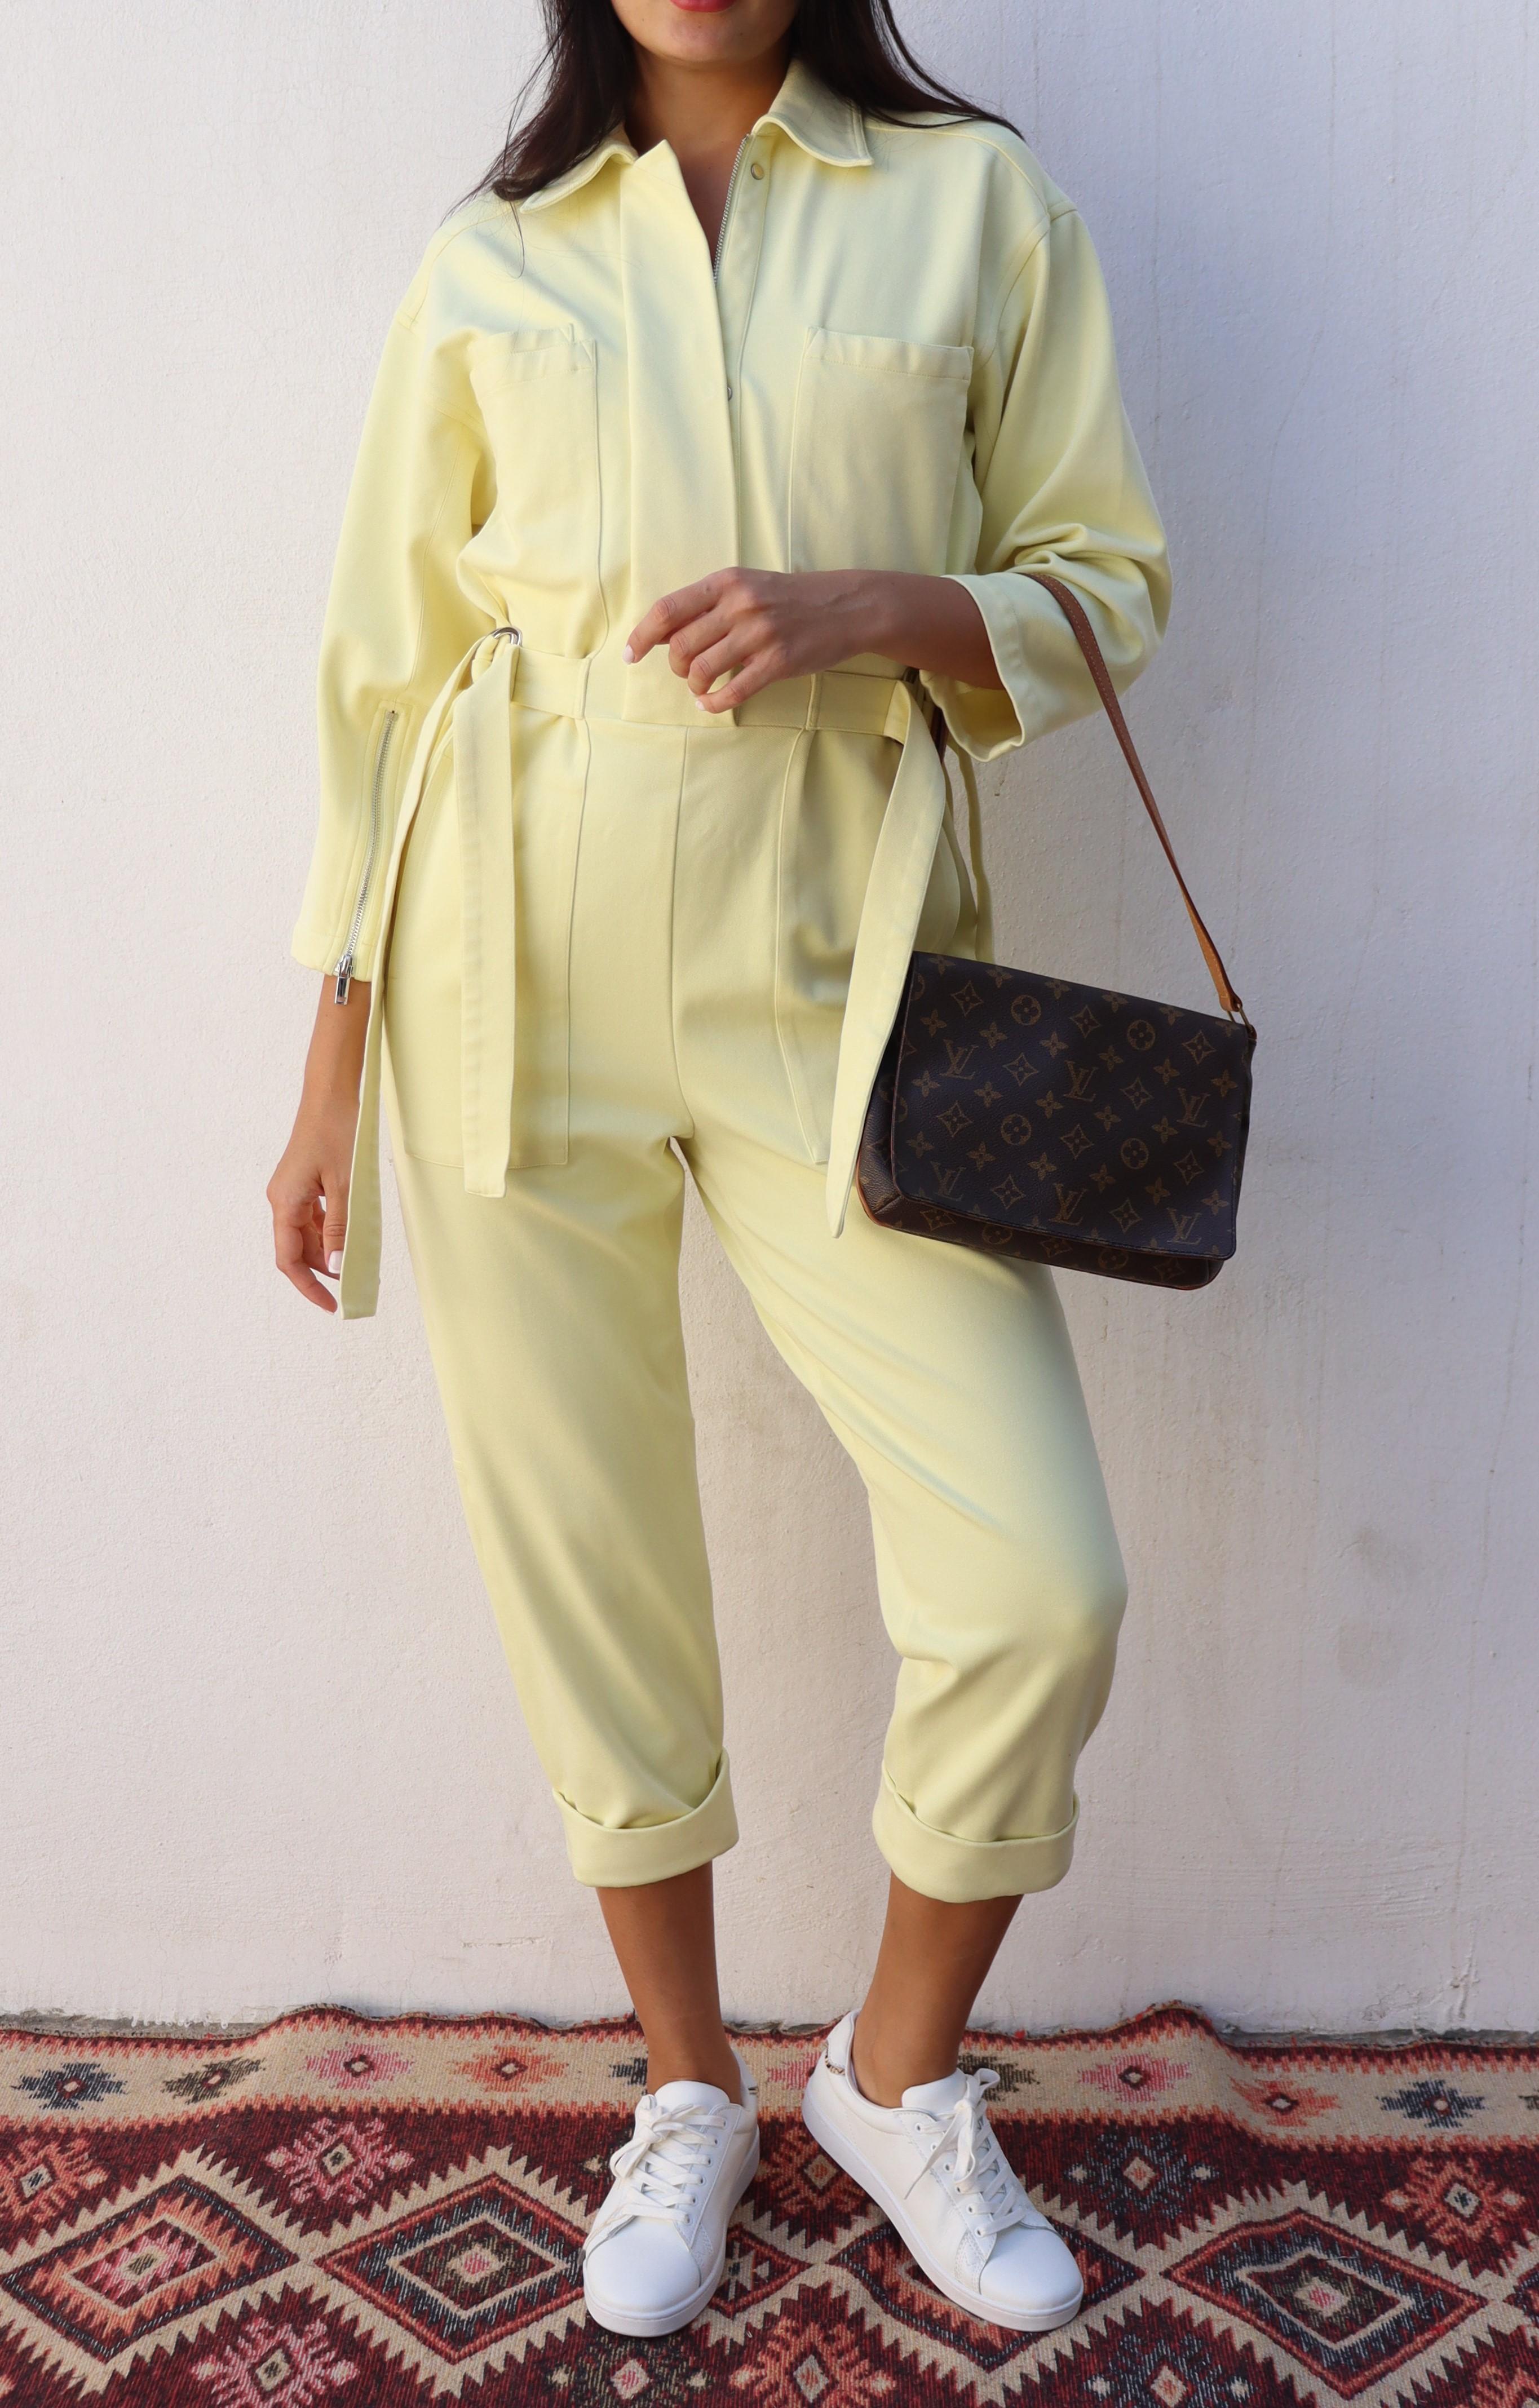 Phillips Lim Pastel Yellow Knit Twill Utility Jumpsuit Size Small In Excellent Condition For Sale In Amman, JO